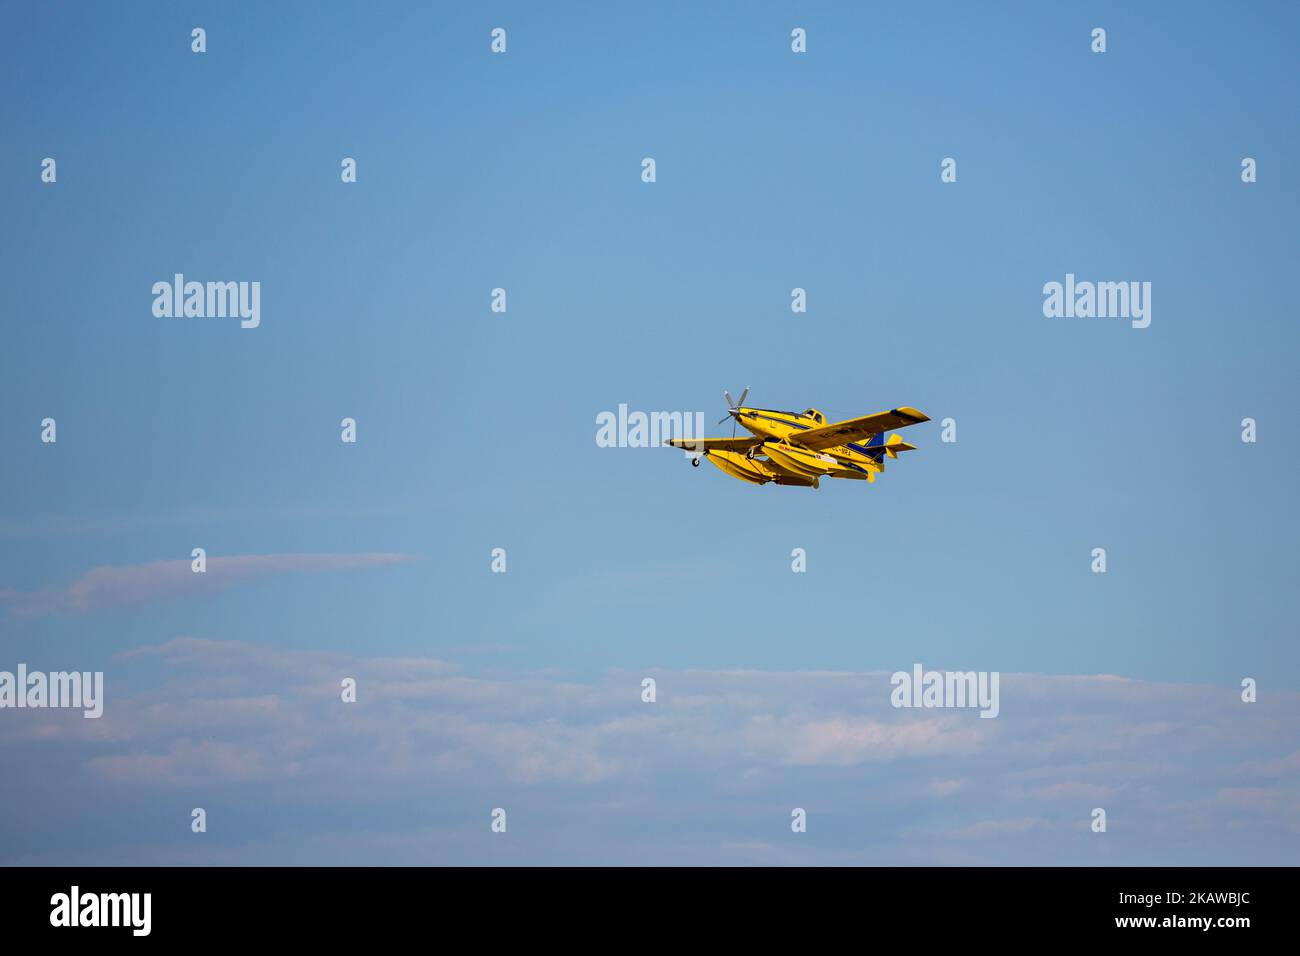 A yellow jet in a flight Stock Photo